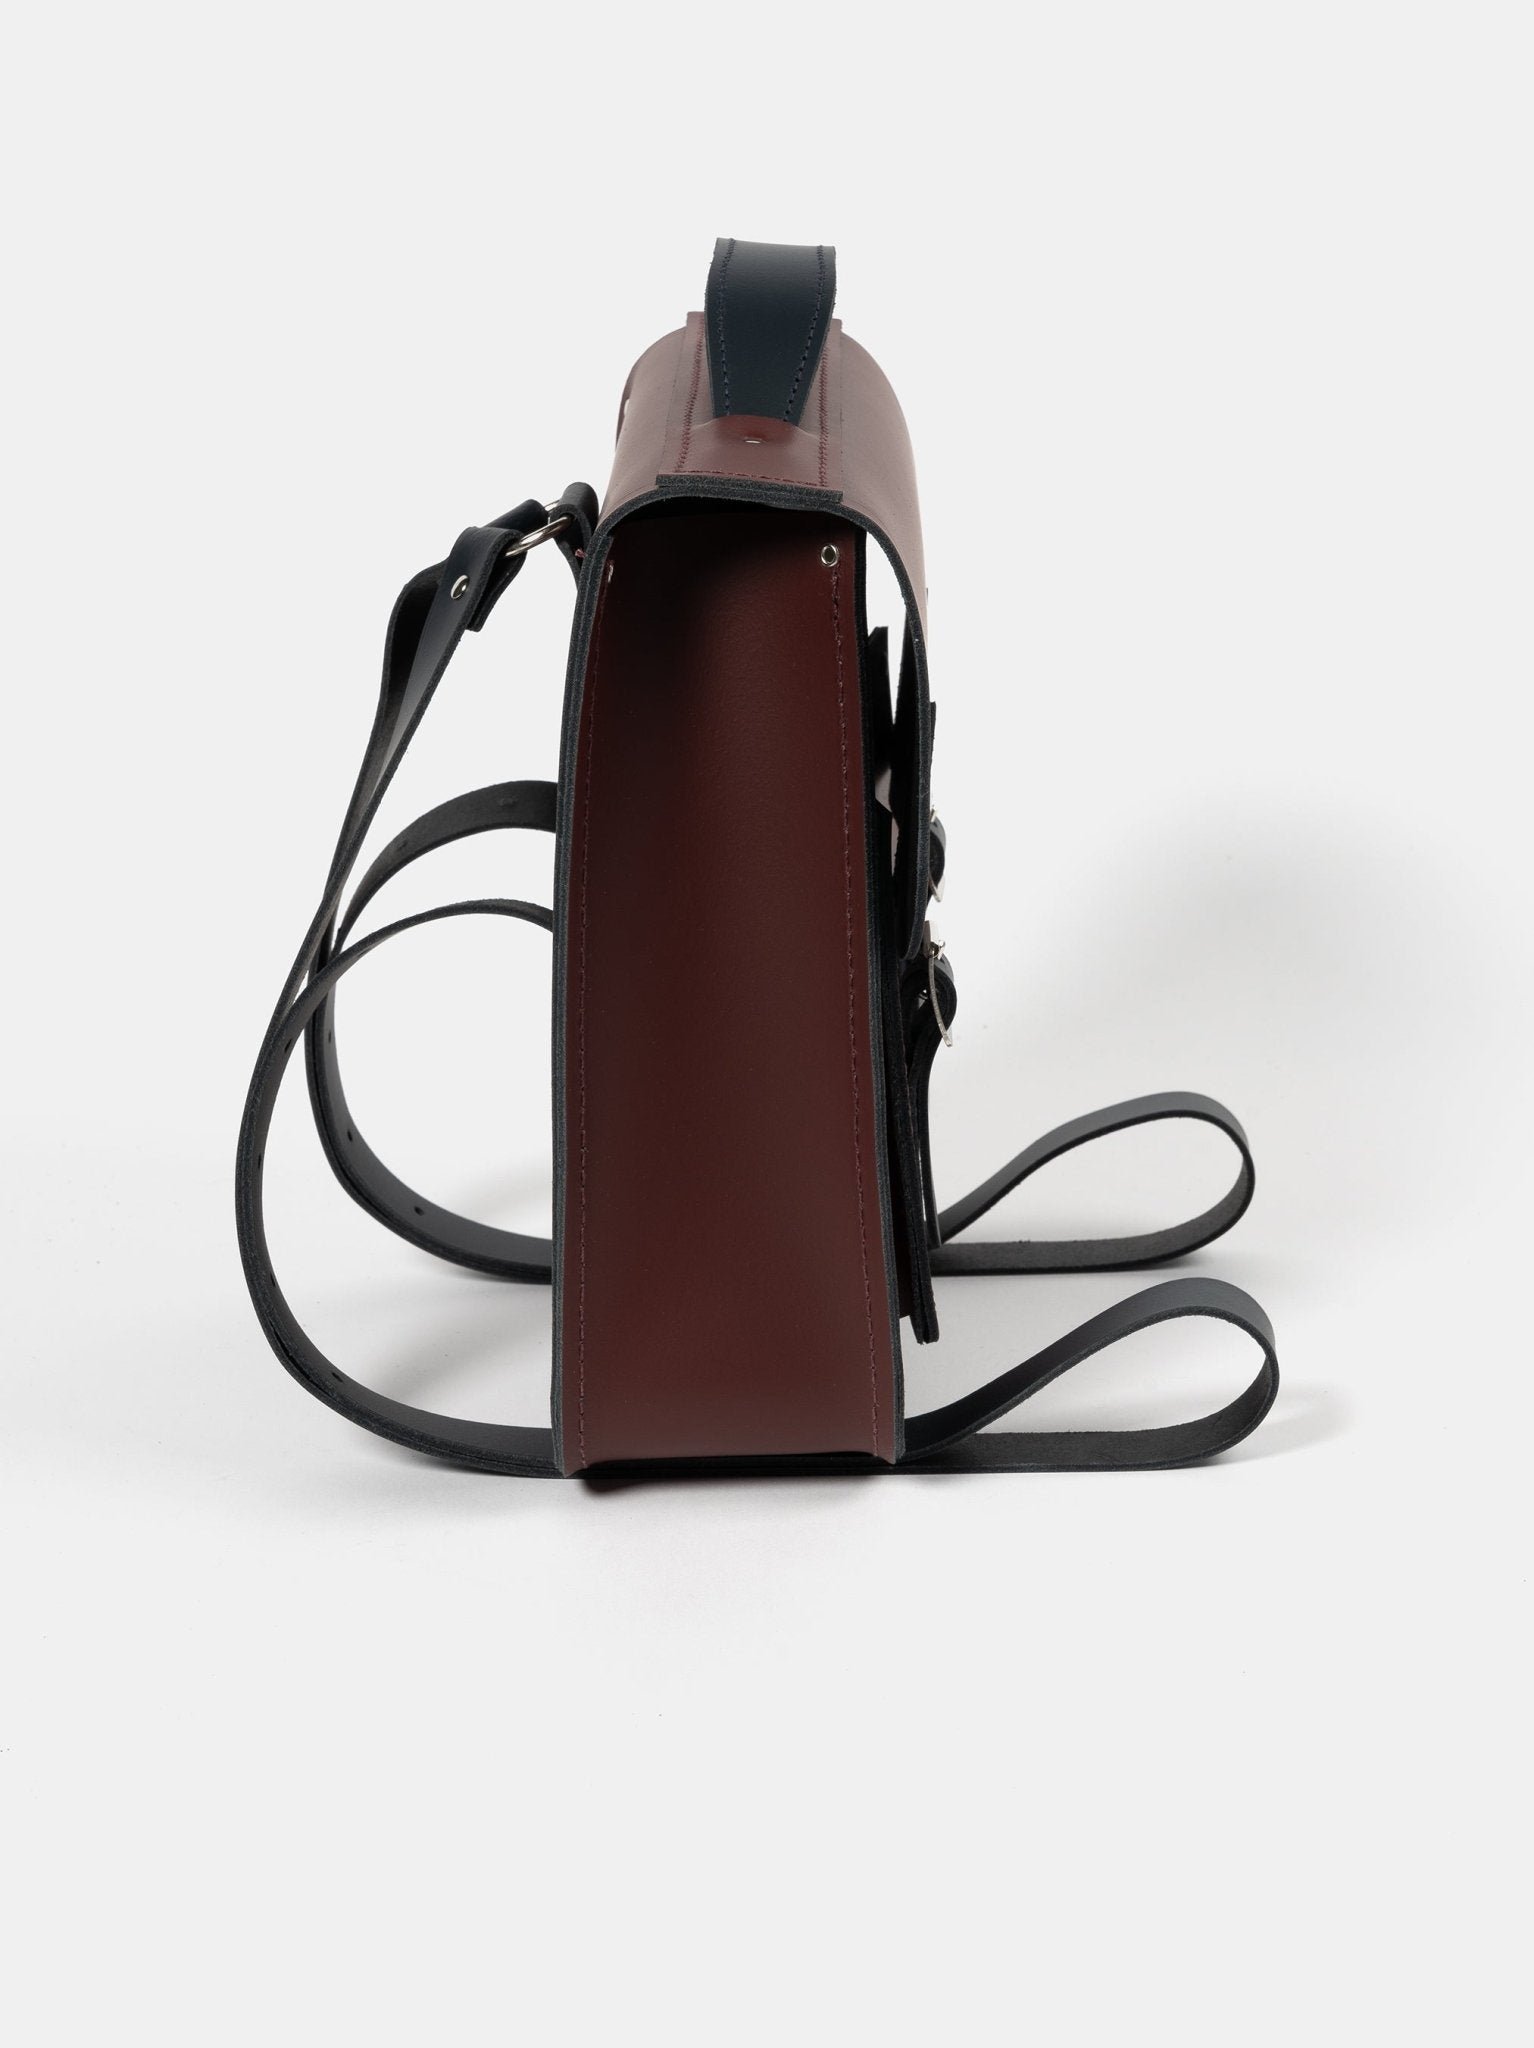 The Small Portrait Backpack - Oxblood & Navy - The Cambridge Satchel Company EU Store